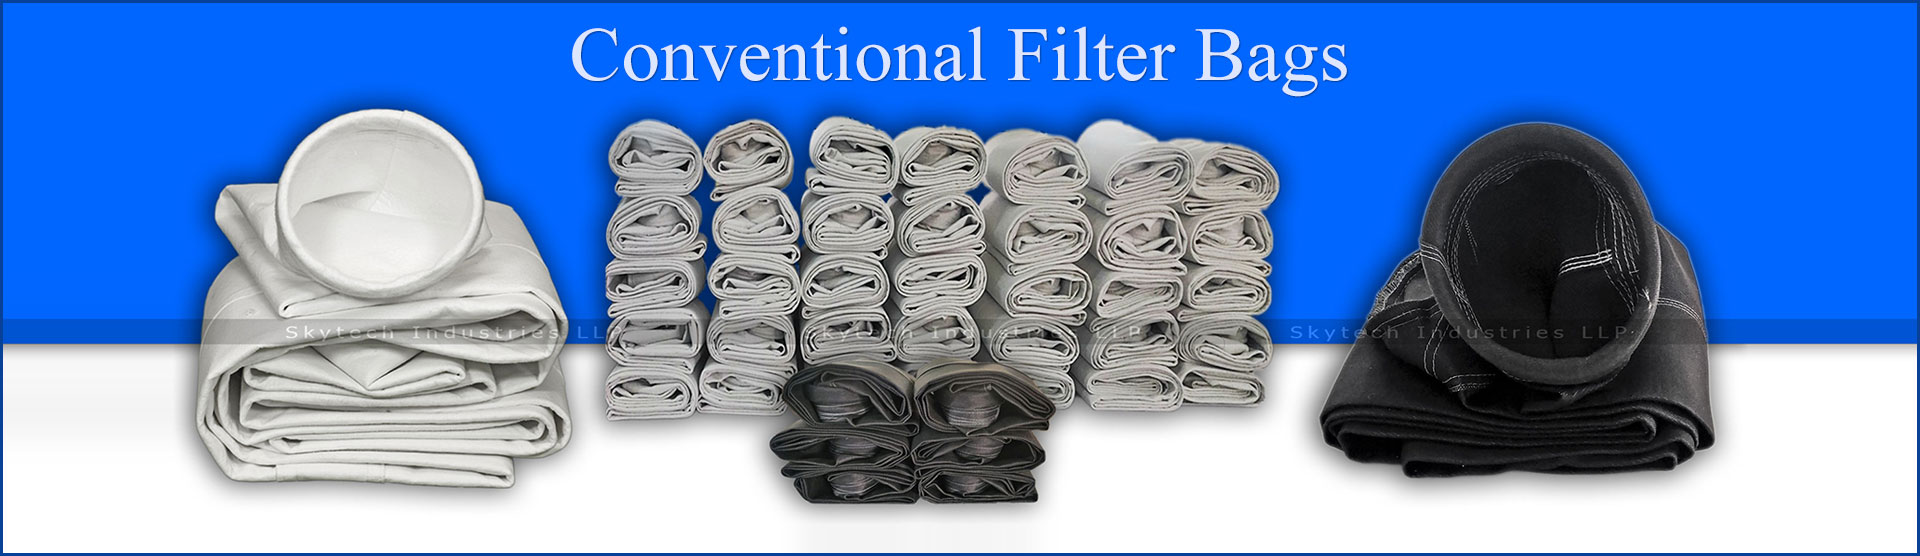 conventional-filter-bags